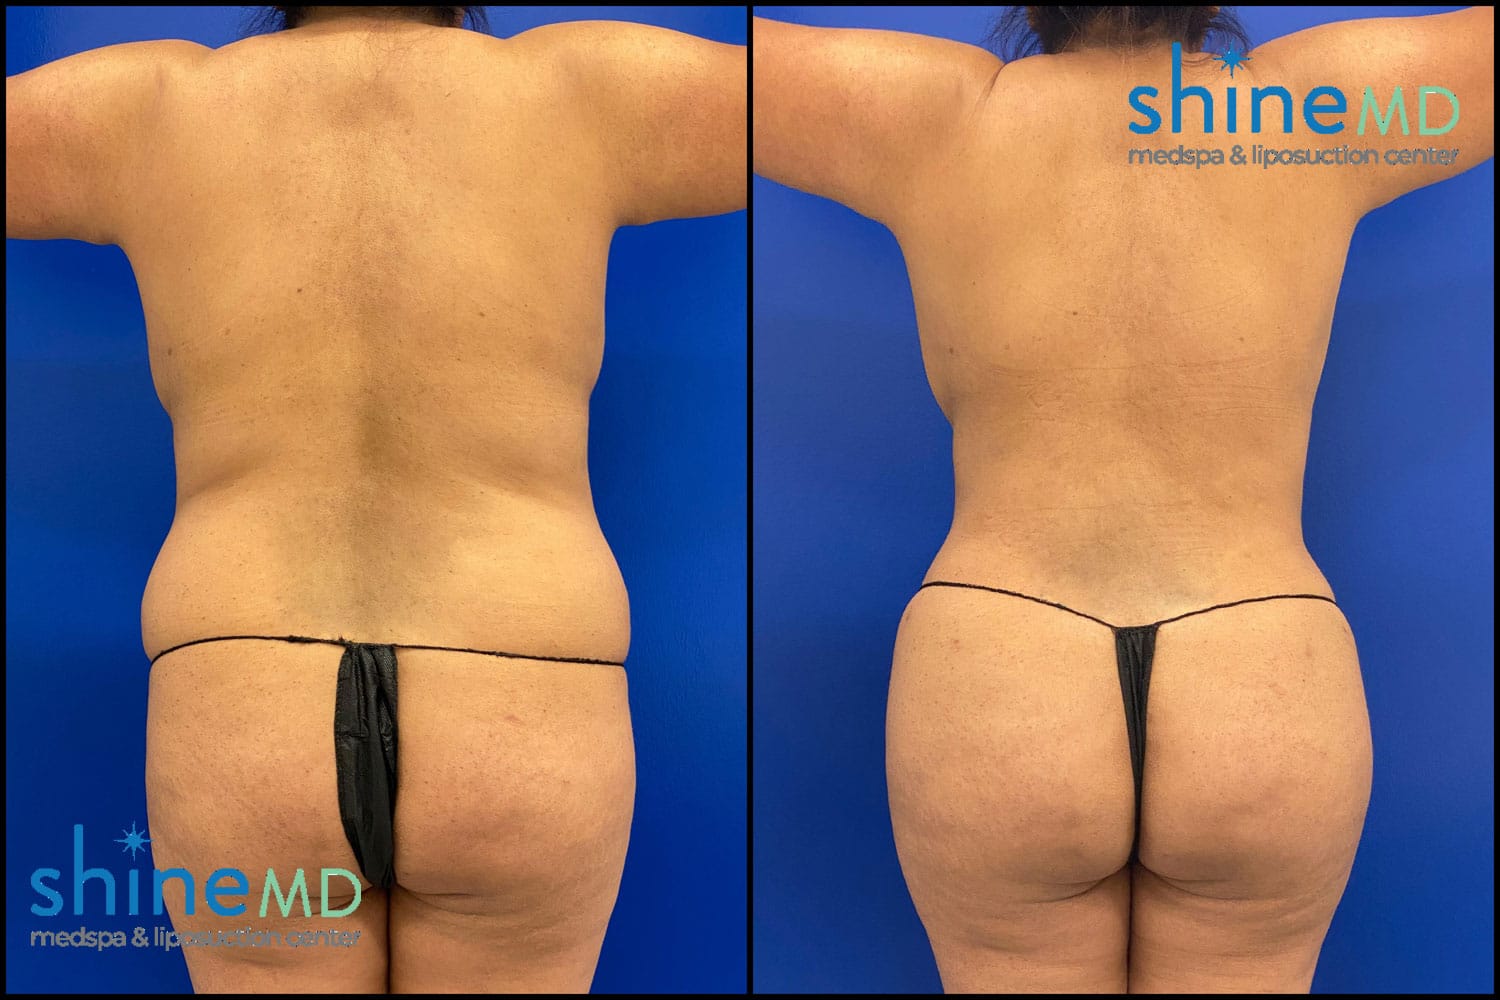 Before & After Photo of Lipo 360 ShineMD